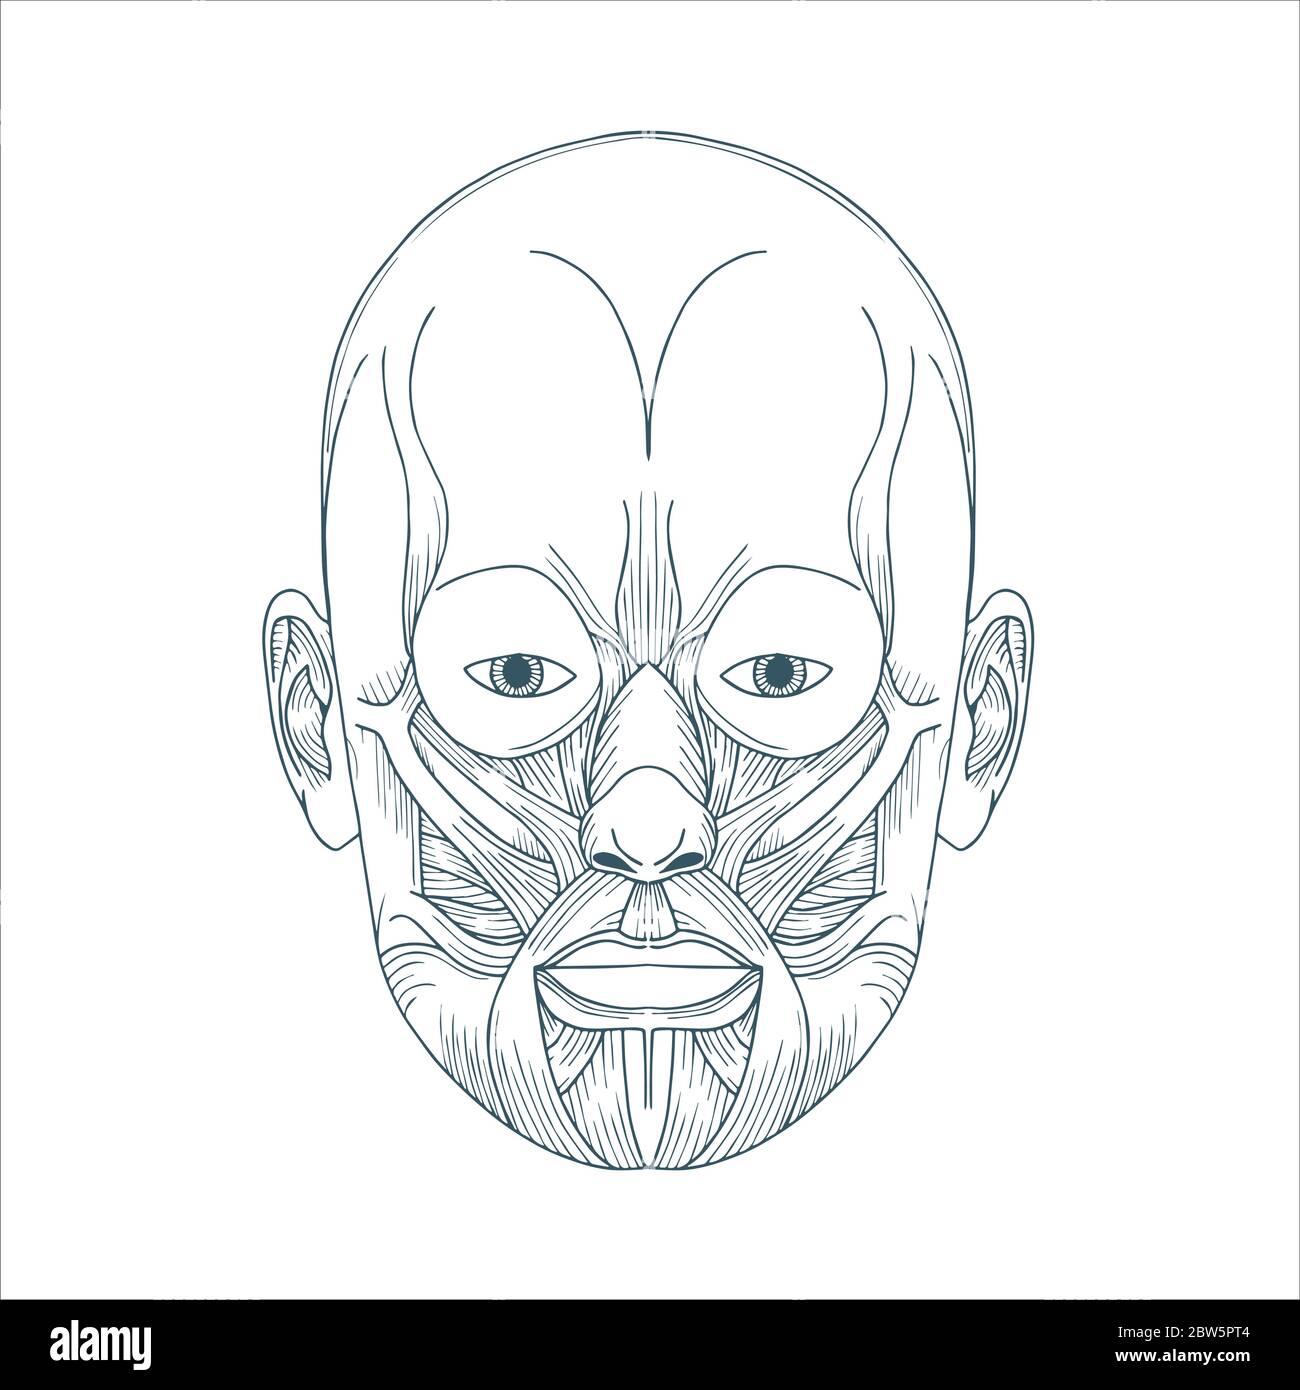 Human head anatomy. Hand drawn human face anatomy. Male head muscular system sketch drawing. Part of set. Stock Vector